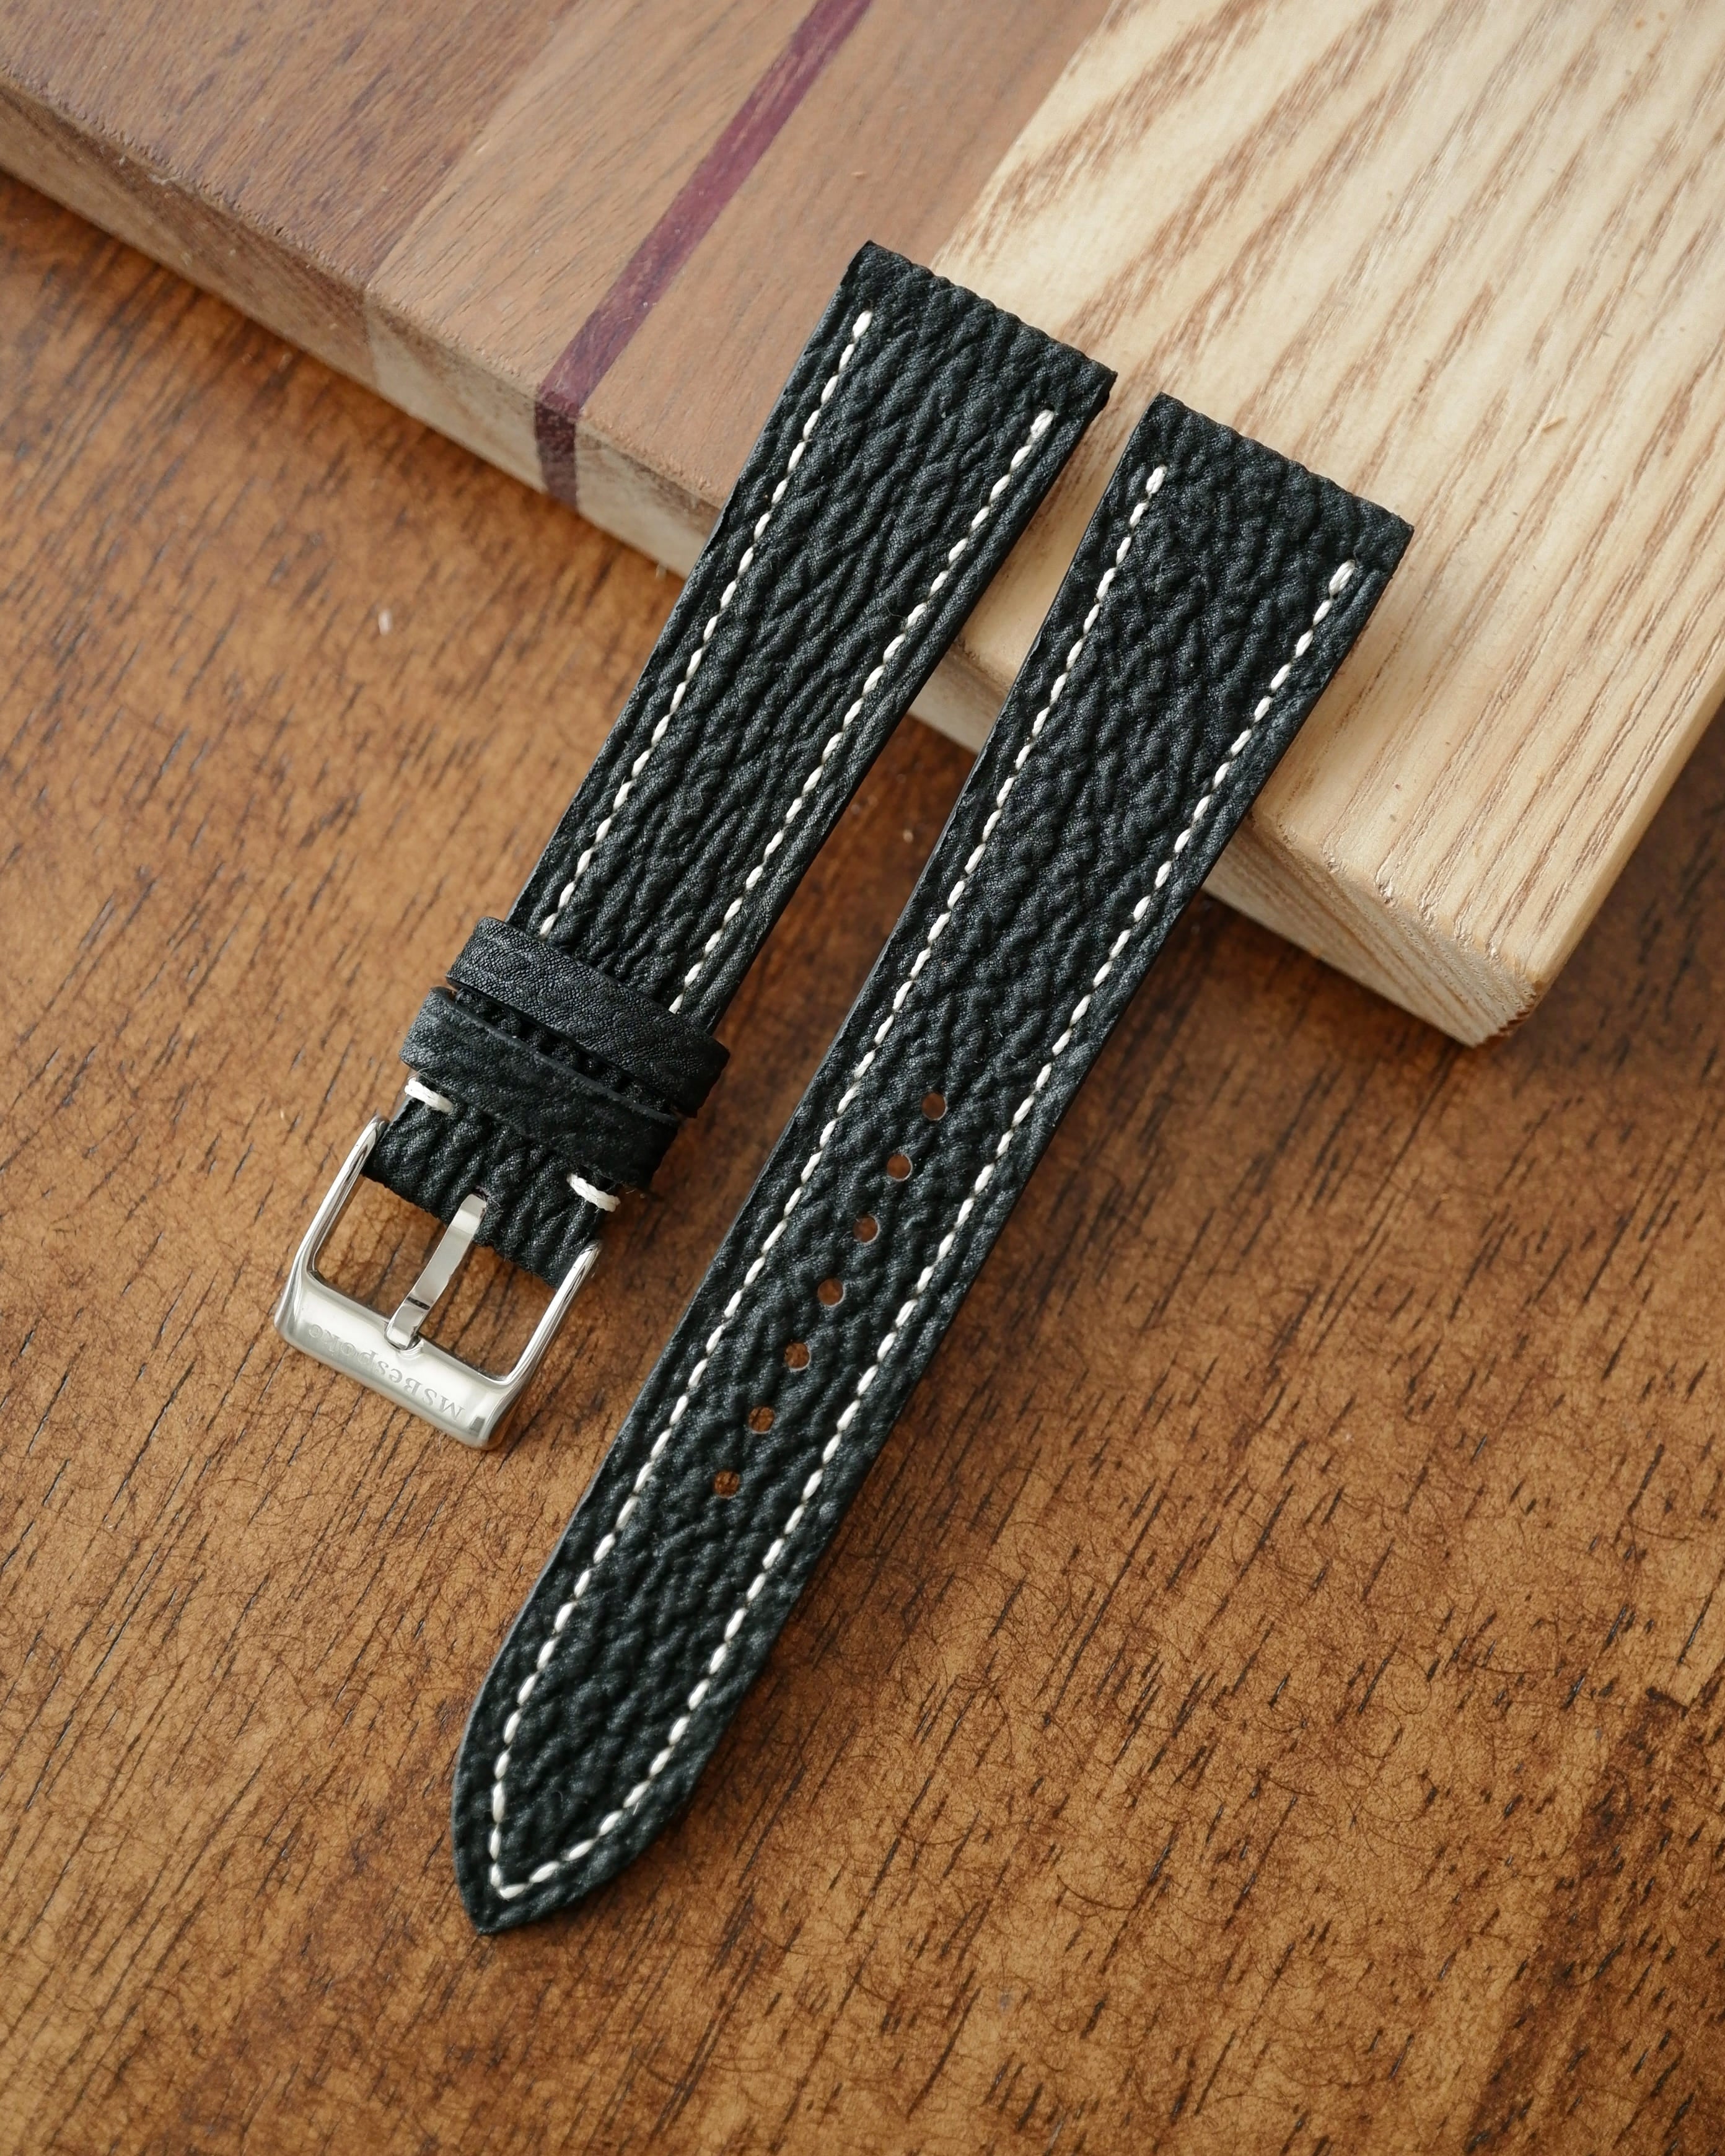 Ready Made - Black Shark Skin Leather Watch Straps